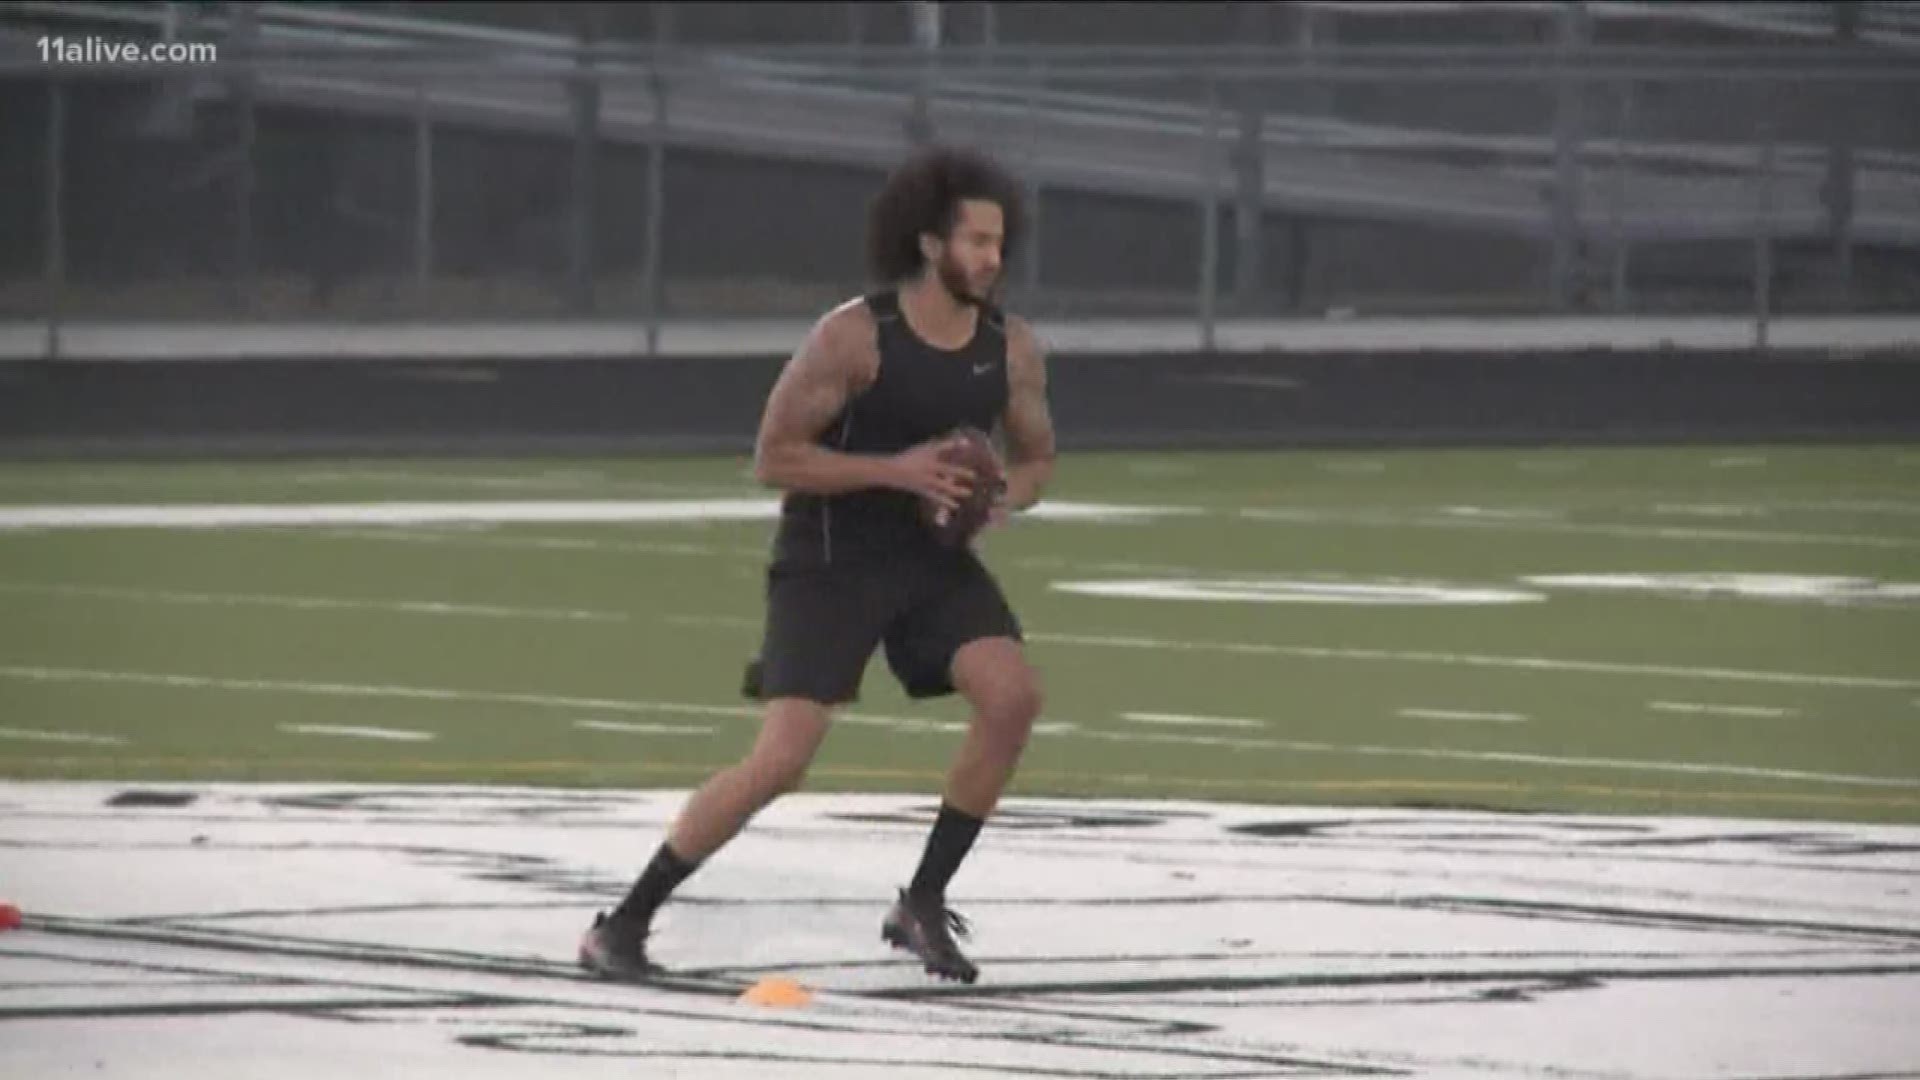 After three years away from the NFL, 32-year-old Colin Kaepernick got a workout in front of League scouts on Saturday afternoon.